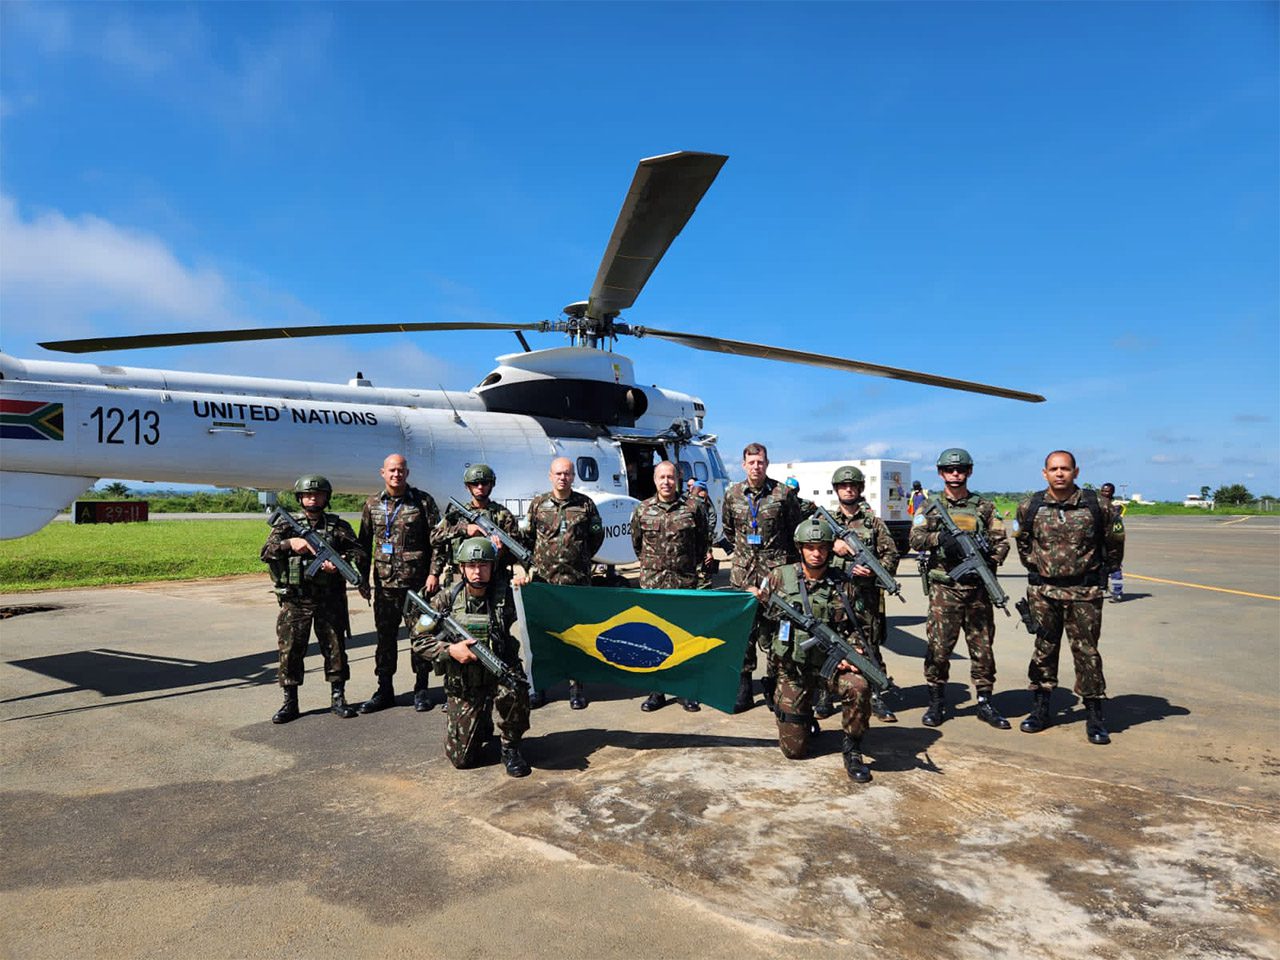 Next Force Commander of the UN peacekeeping mission in Congo is again a Brazilian general